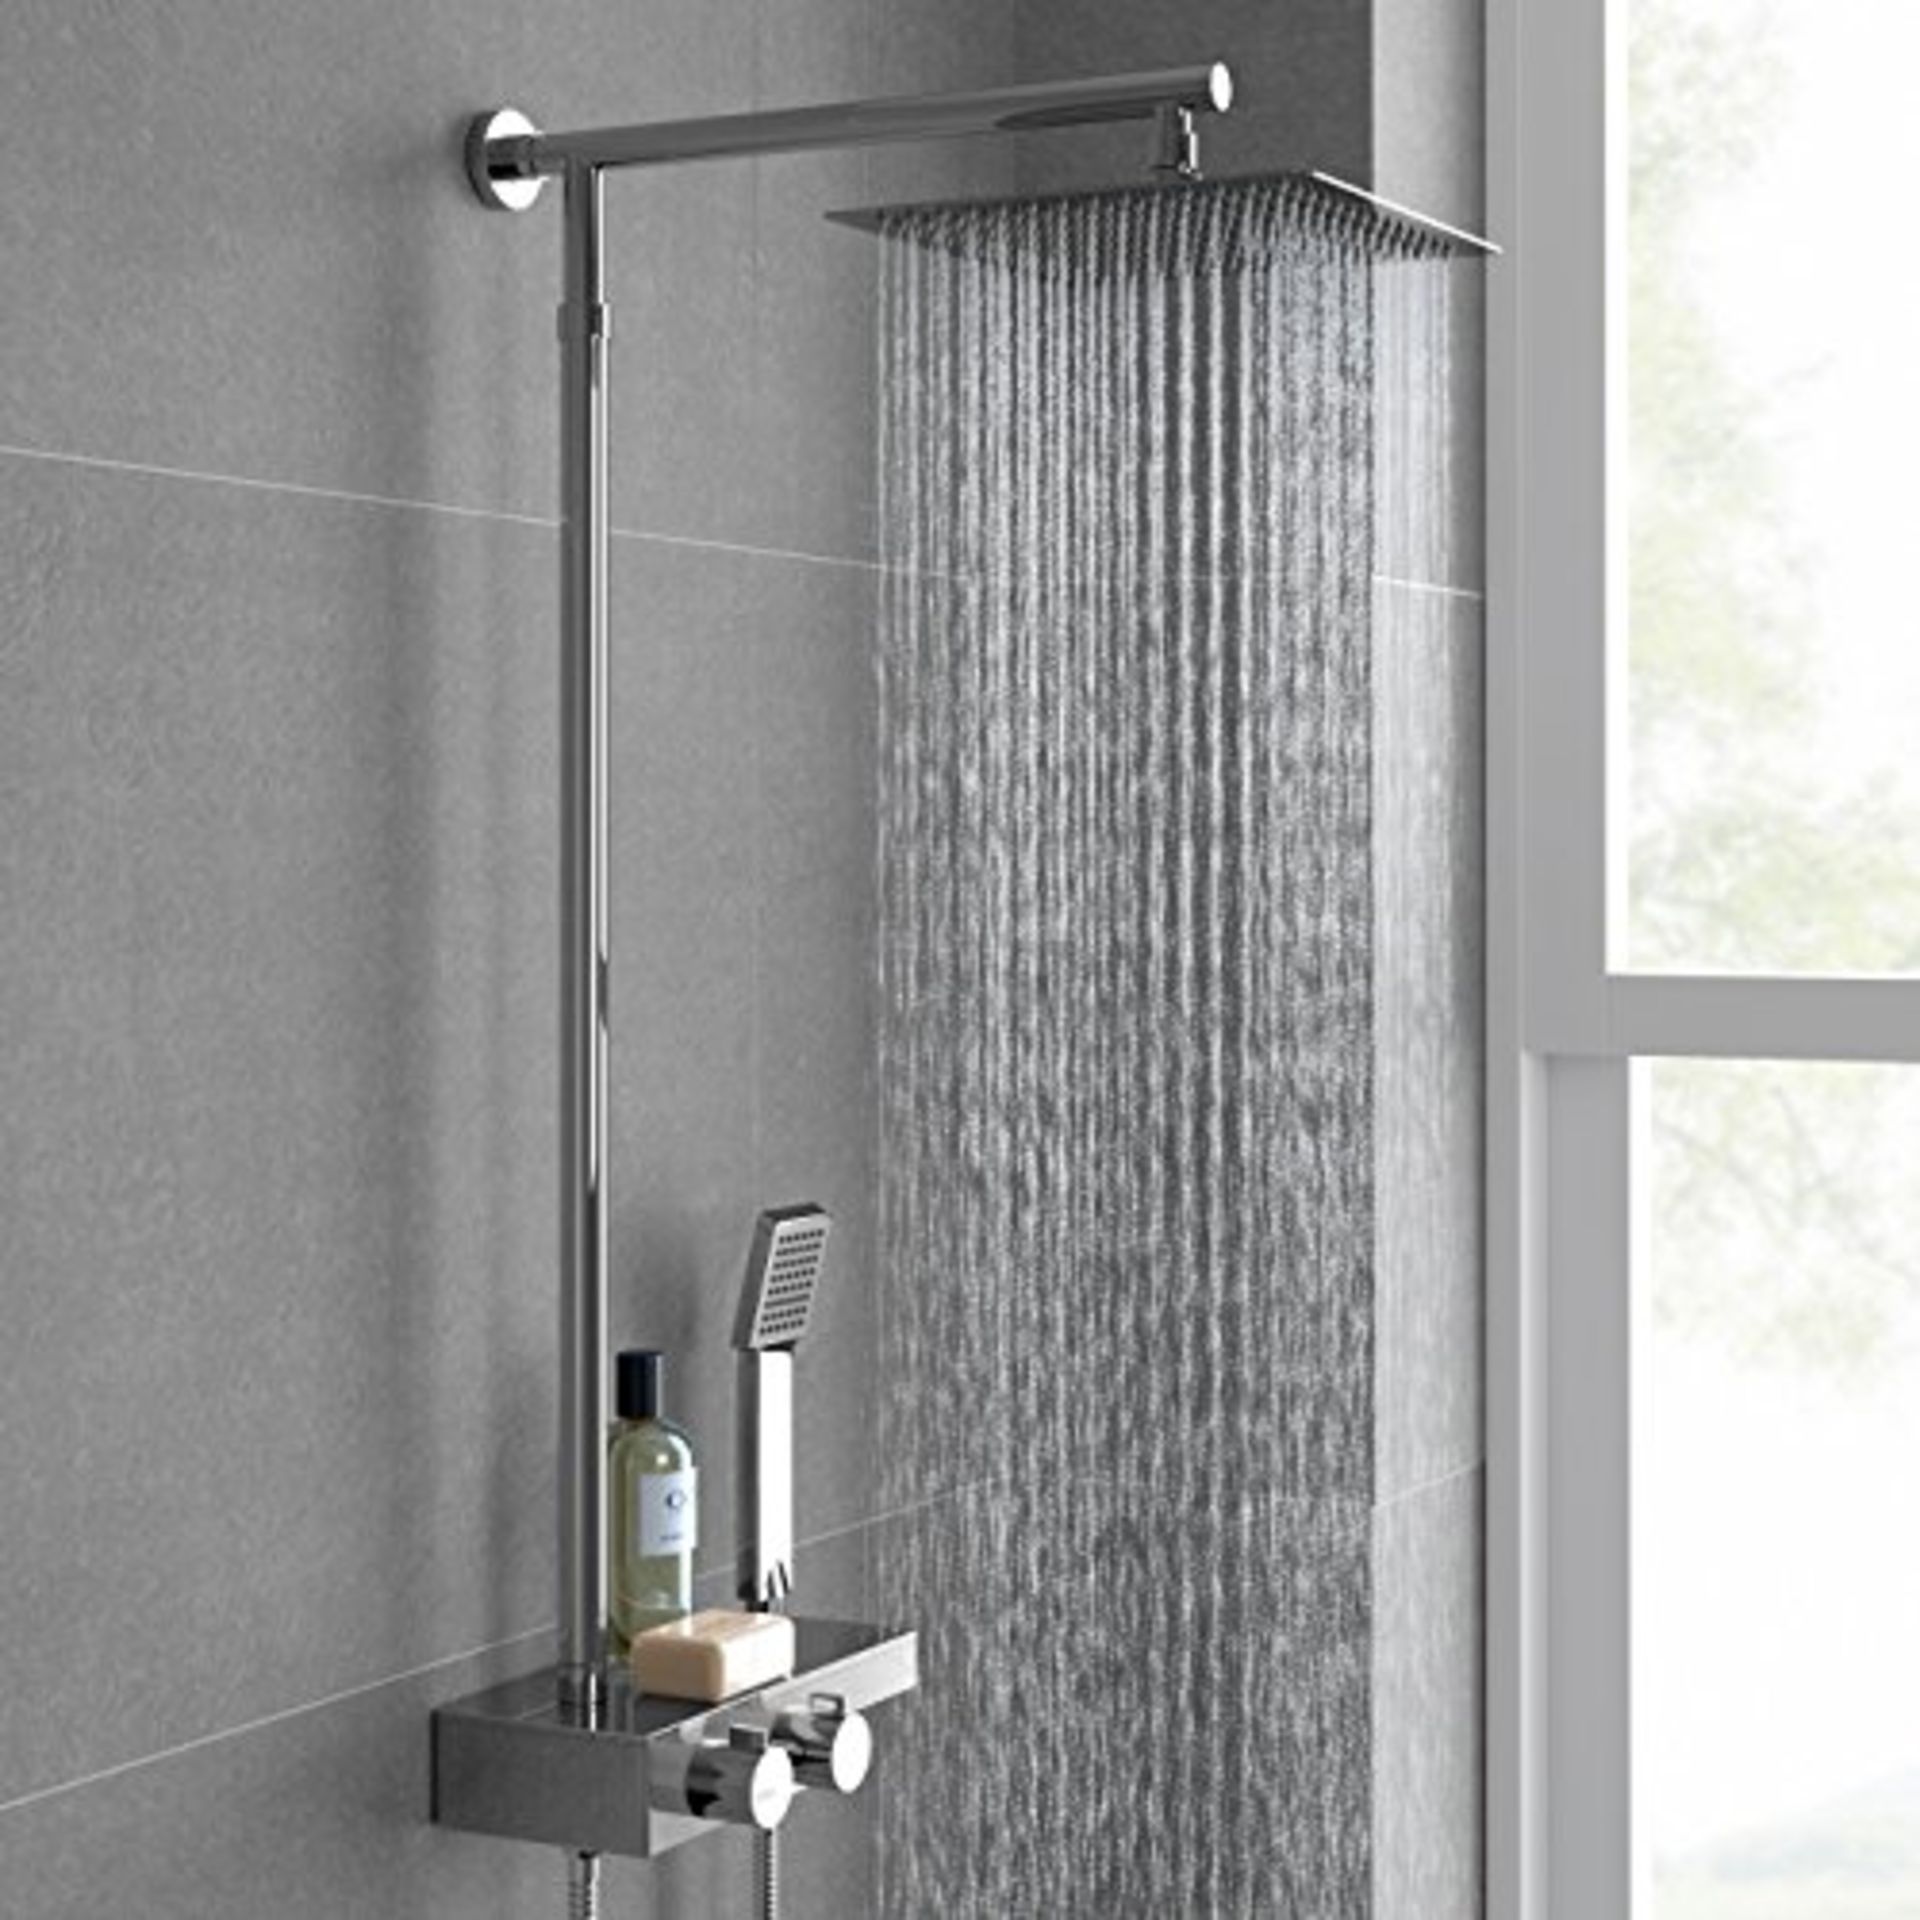 (KN47) Square Thermostatic Bar Mixer Shower Set Valve with Shelf 10" Head + Handset . Solid br...